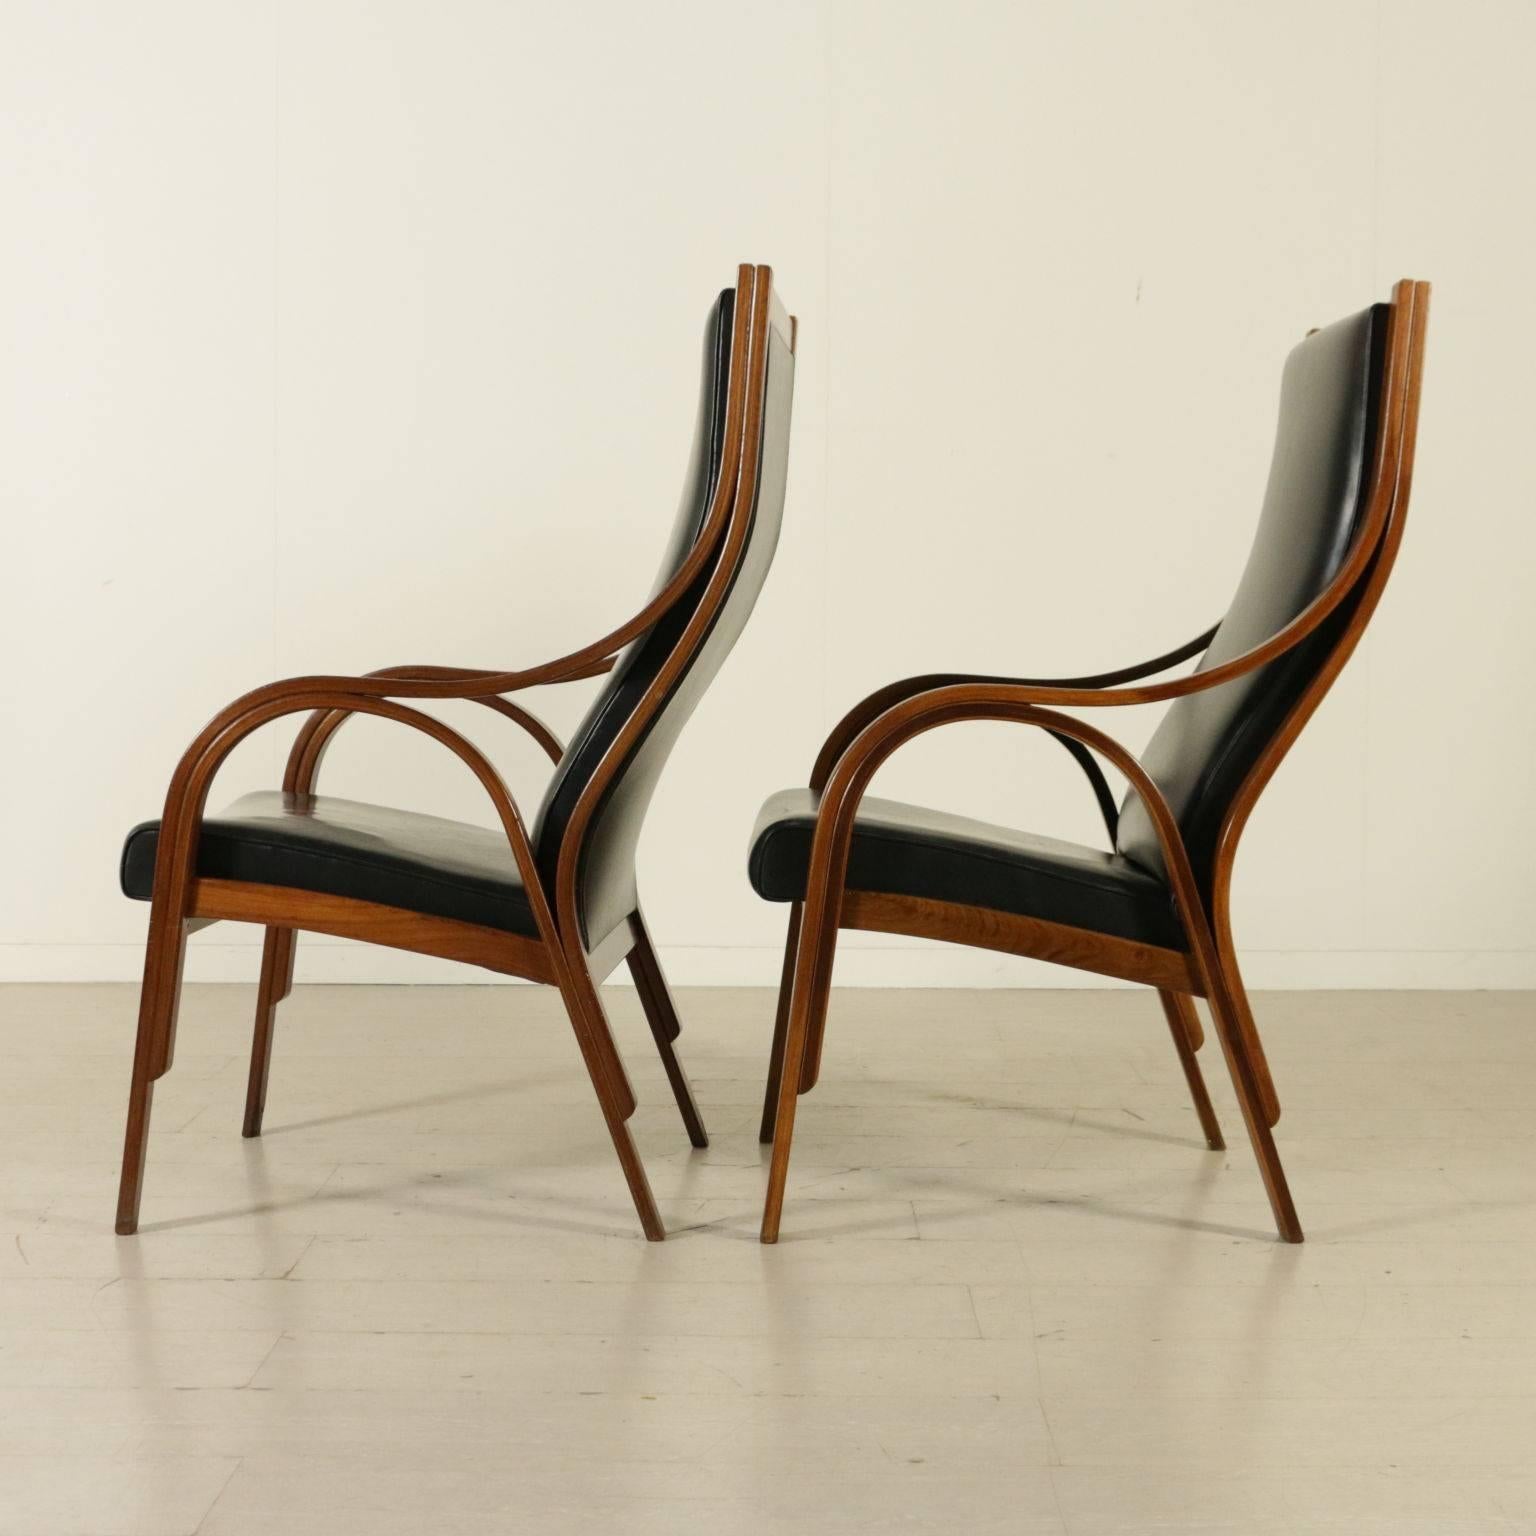 Cavour Armchairs by Stoppino, Meneghetti and Gregotti 2